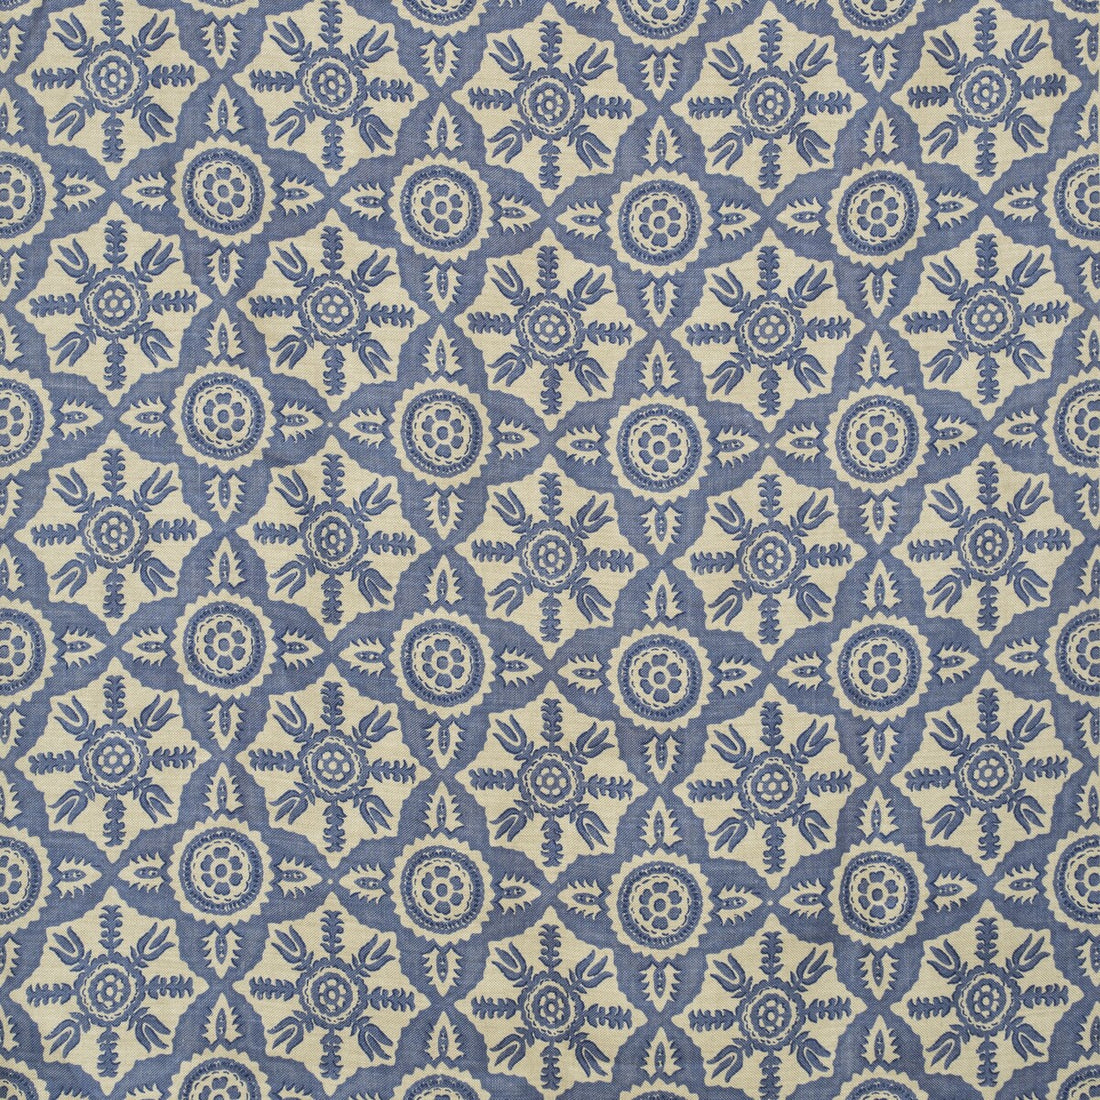 Rossmore Indigo fabric in indigo color - pattern BFC-3648.50.0 - by Lee Jofa in the Blithfield collection